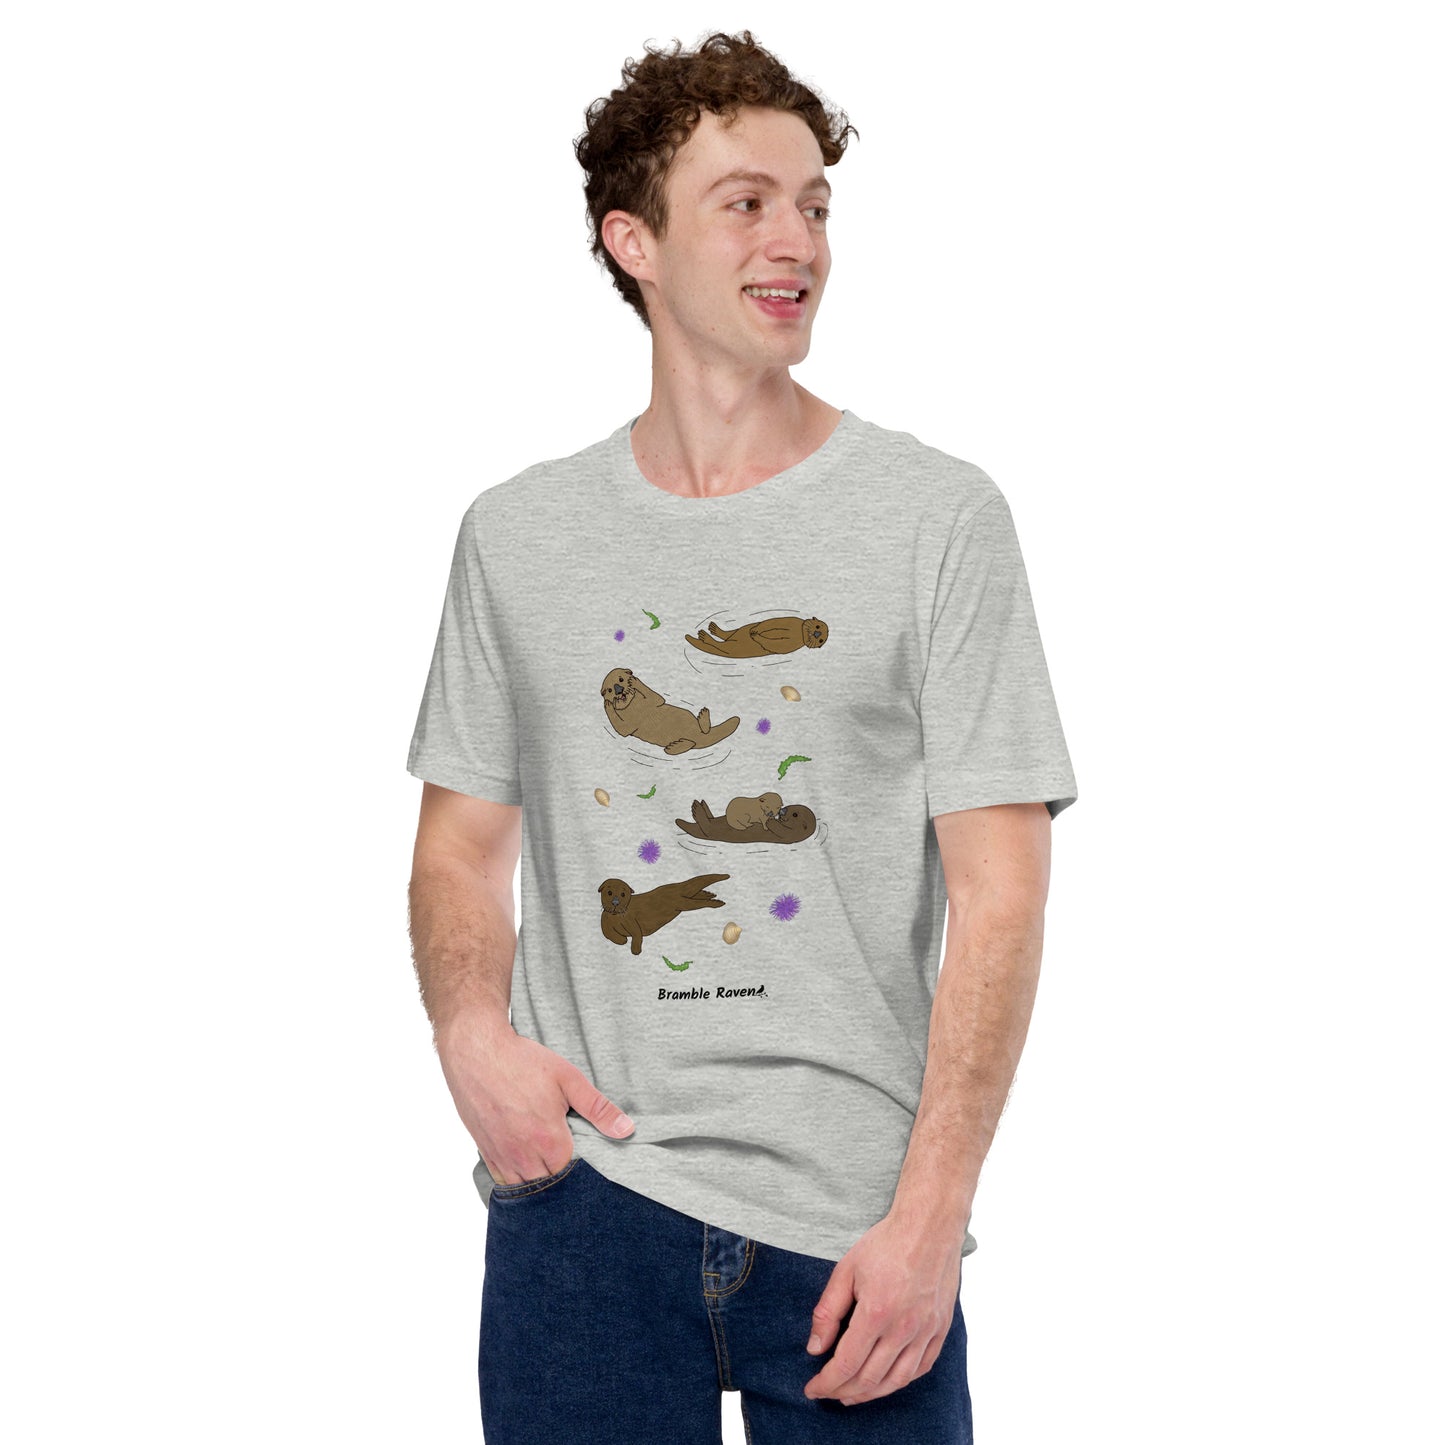 Unisex athletic heather grey colored t-shirt. Features four sea otters with seaweed, shells, and sea urchins. Shown on male model looking right.